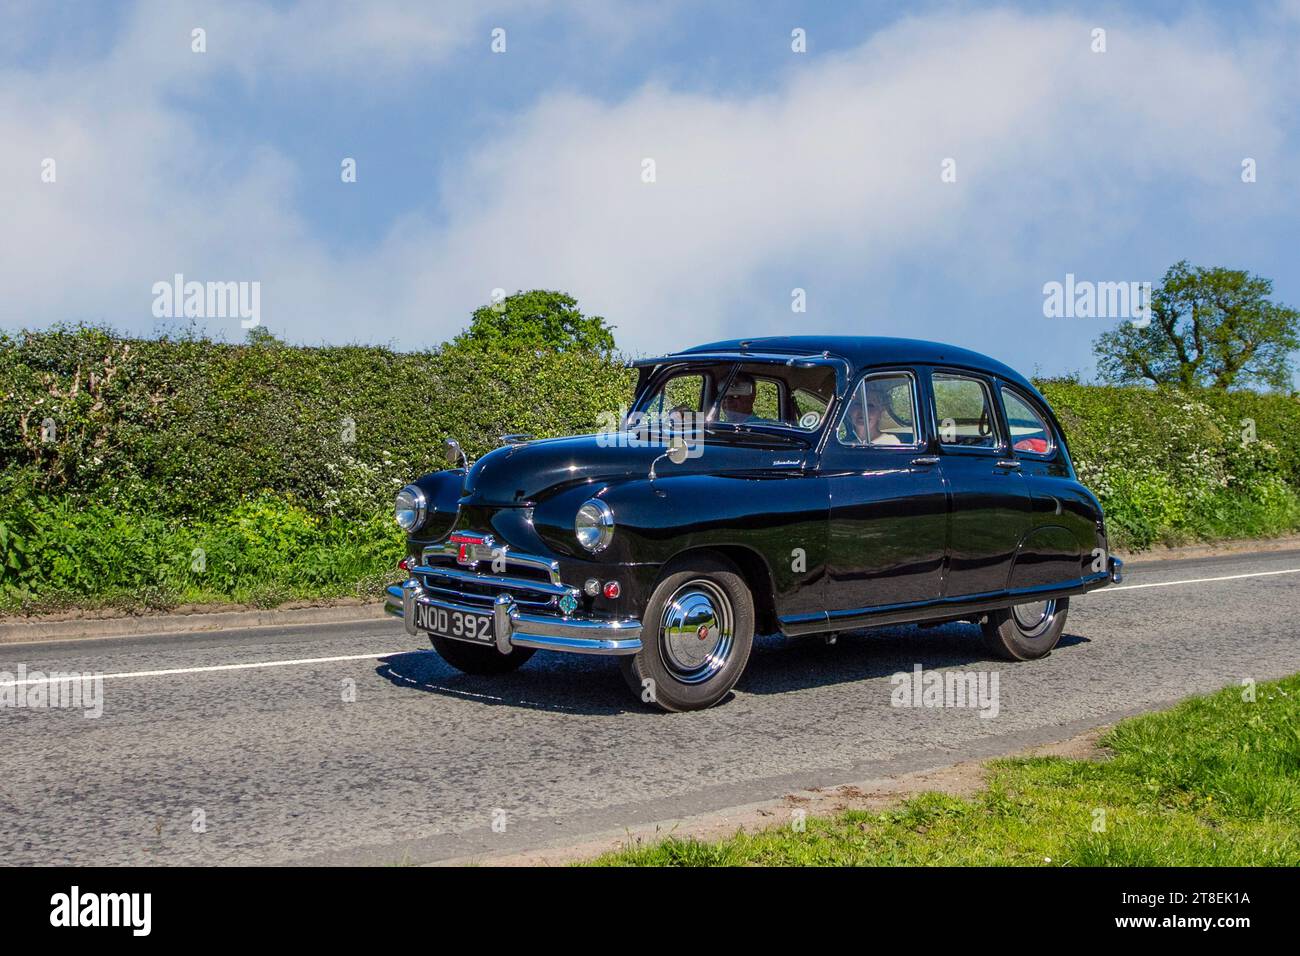 1952 50s fifties Black  Standard Vanguard Phase 1A (1948-52), Engine 2088cc S4 OHV, six-seat saloon; Vintage cars restored British classic motors, automobile collectors,  motoring enthusiasts and historic veteran cars travelling in Cheshire, UK Stock Photo